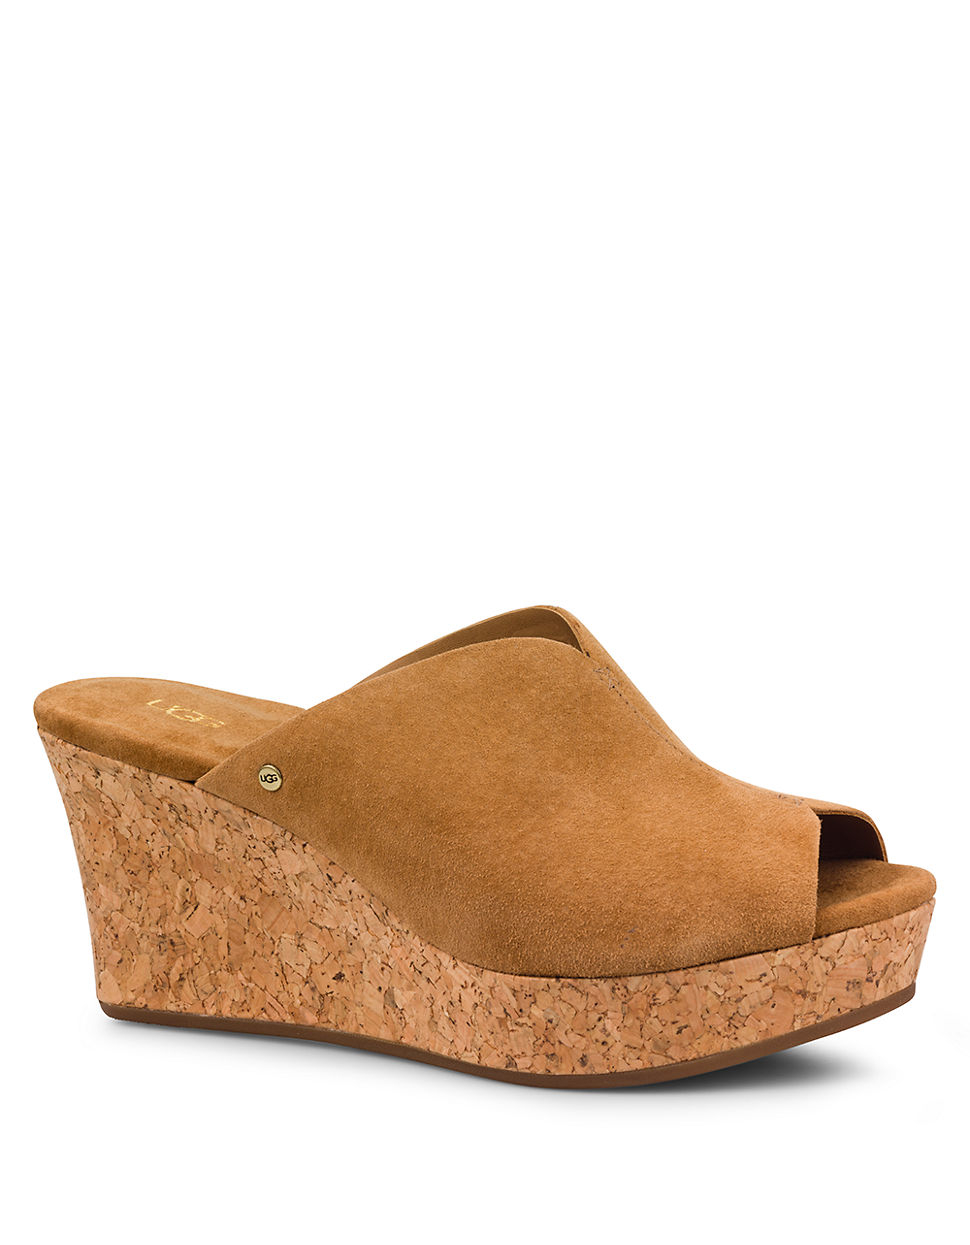 Ugg Dominique Suede Wedge Sandals in Brown | Lyst